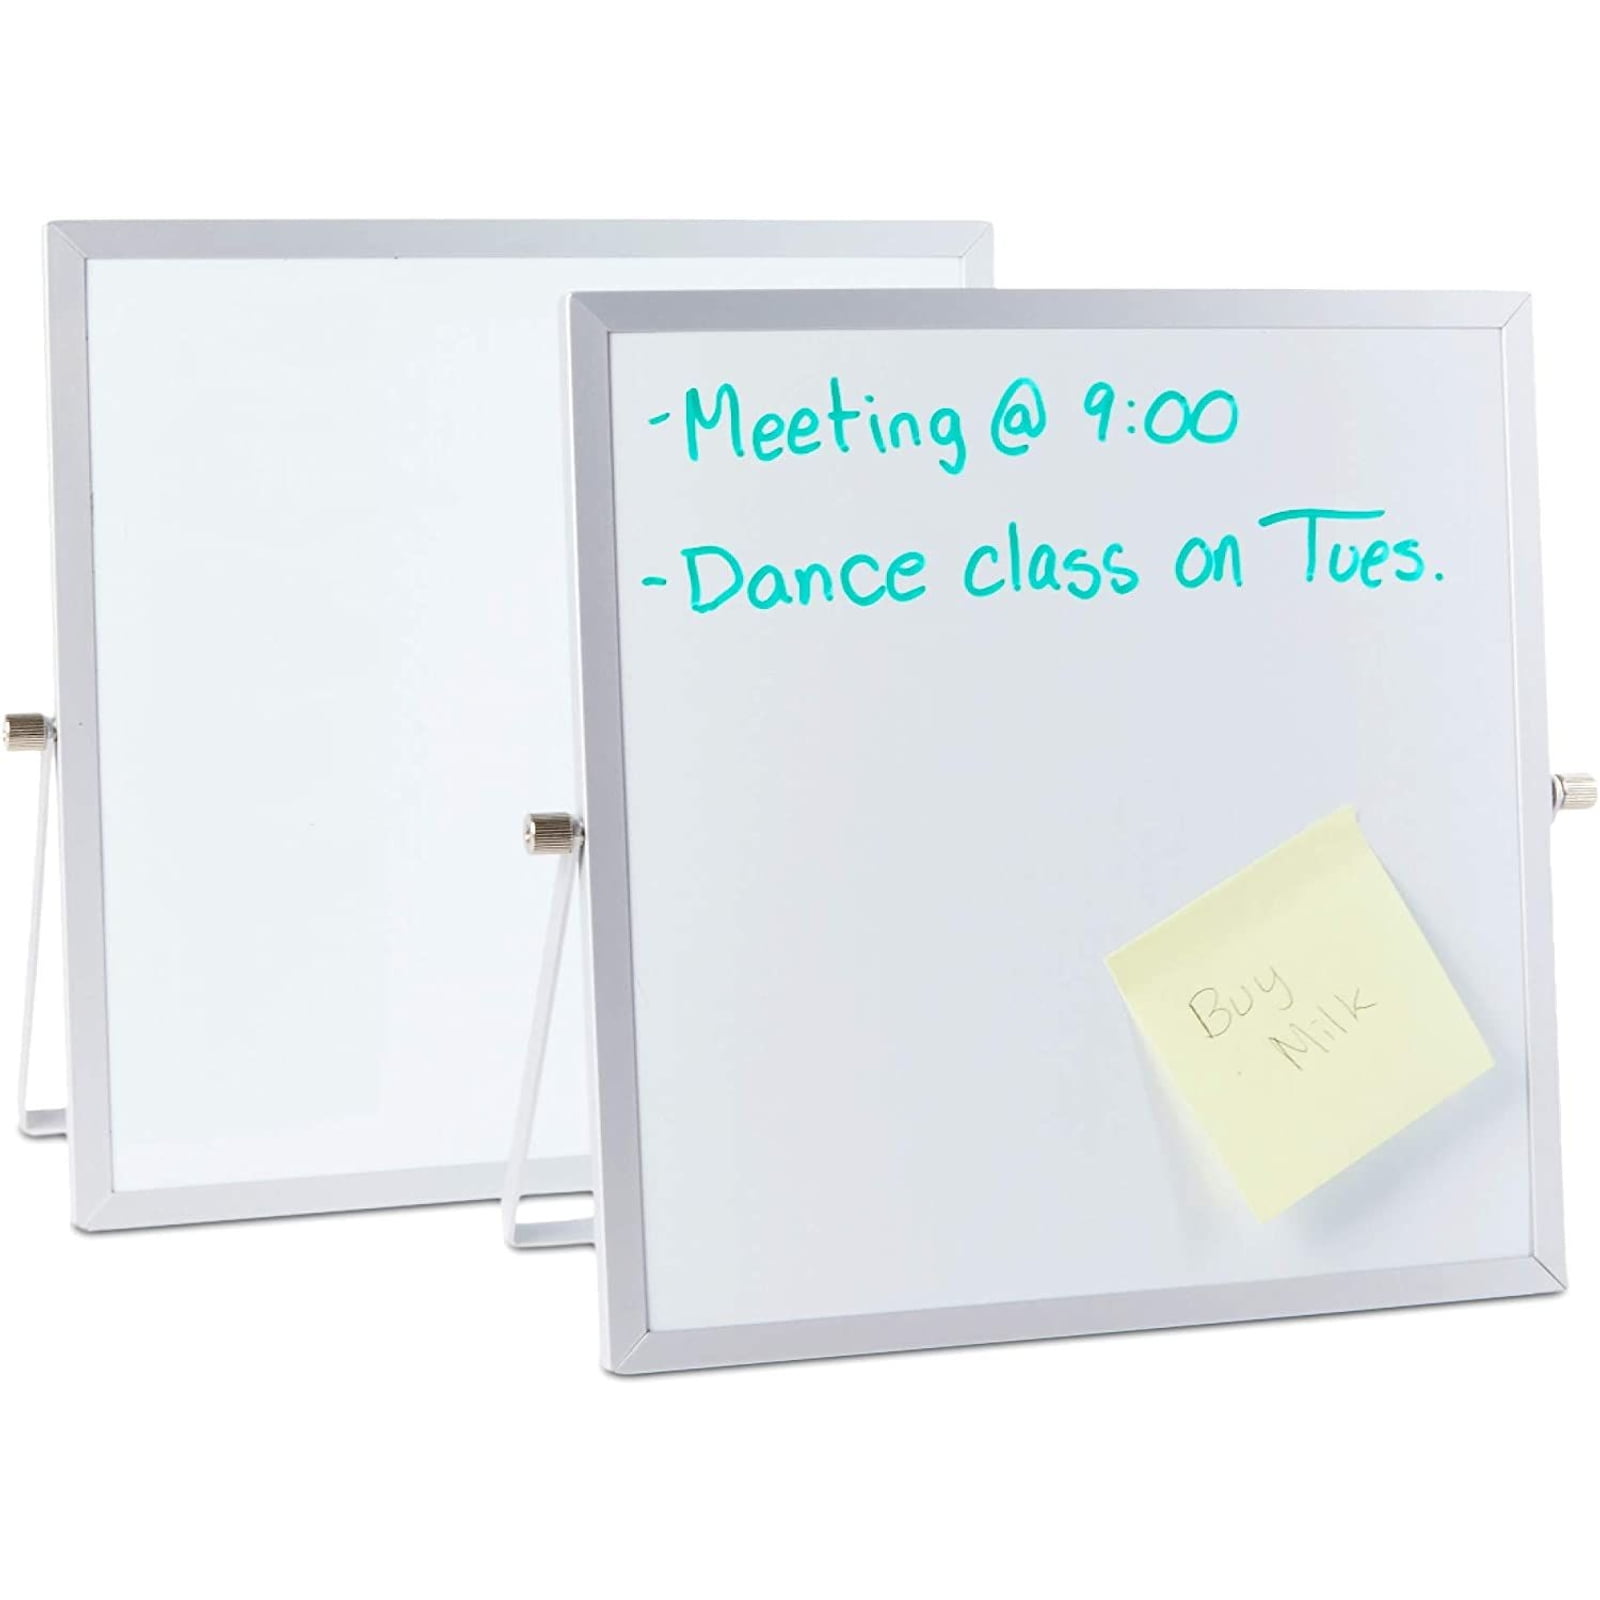 Details about   Small Dry Erase White Board Magnetic Desktop Foldable Whiteboard Portable Mi 